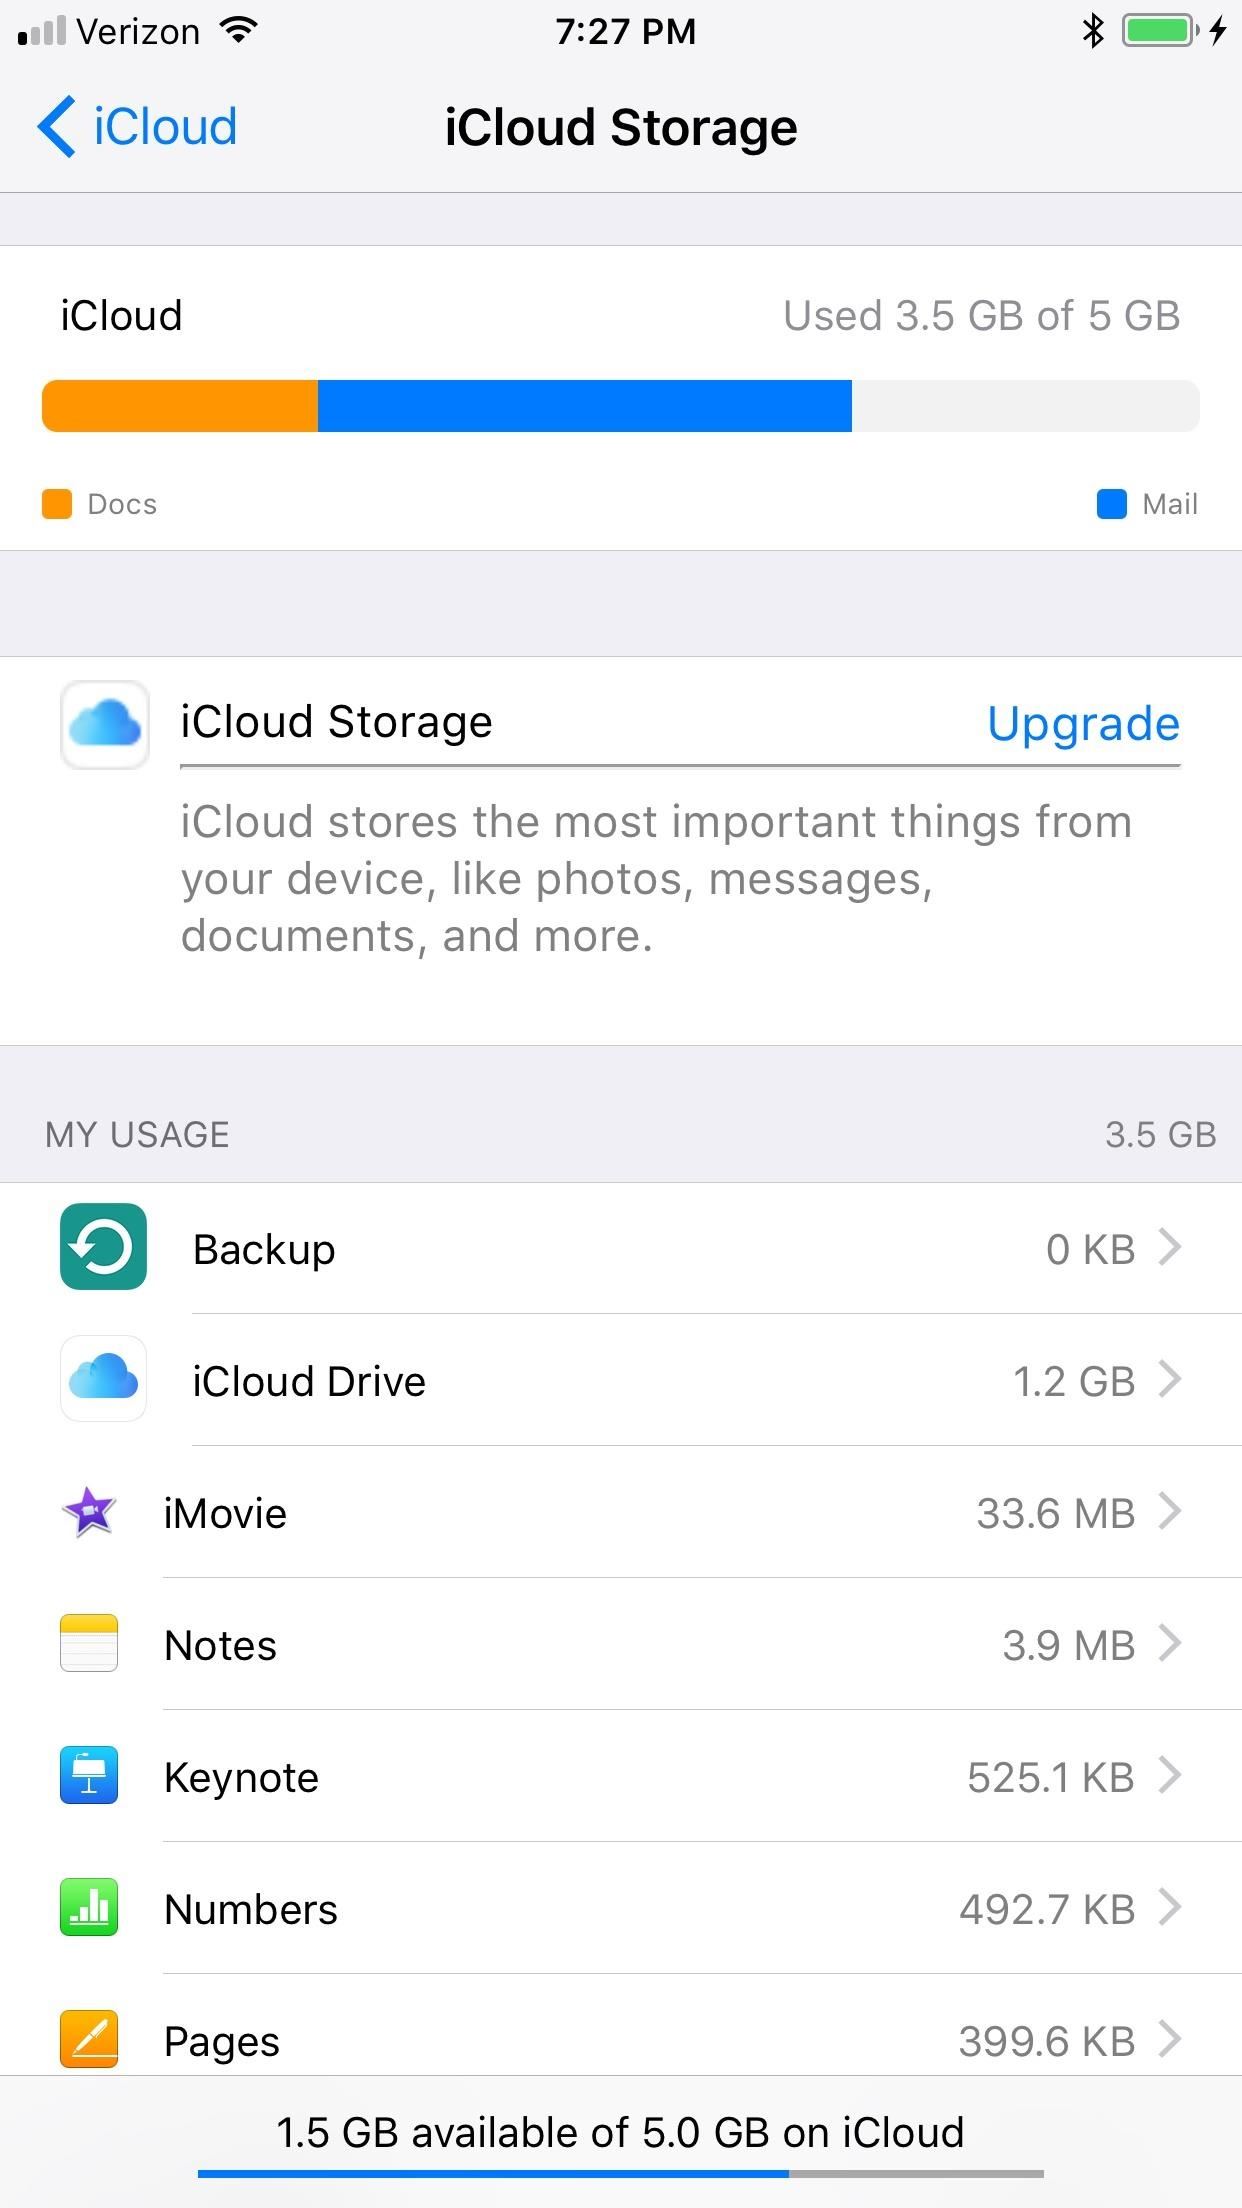 iOS 11 Just Upgraded the iPhone's Storage Management System with More Features